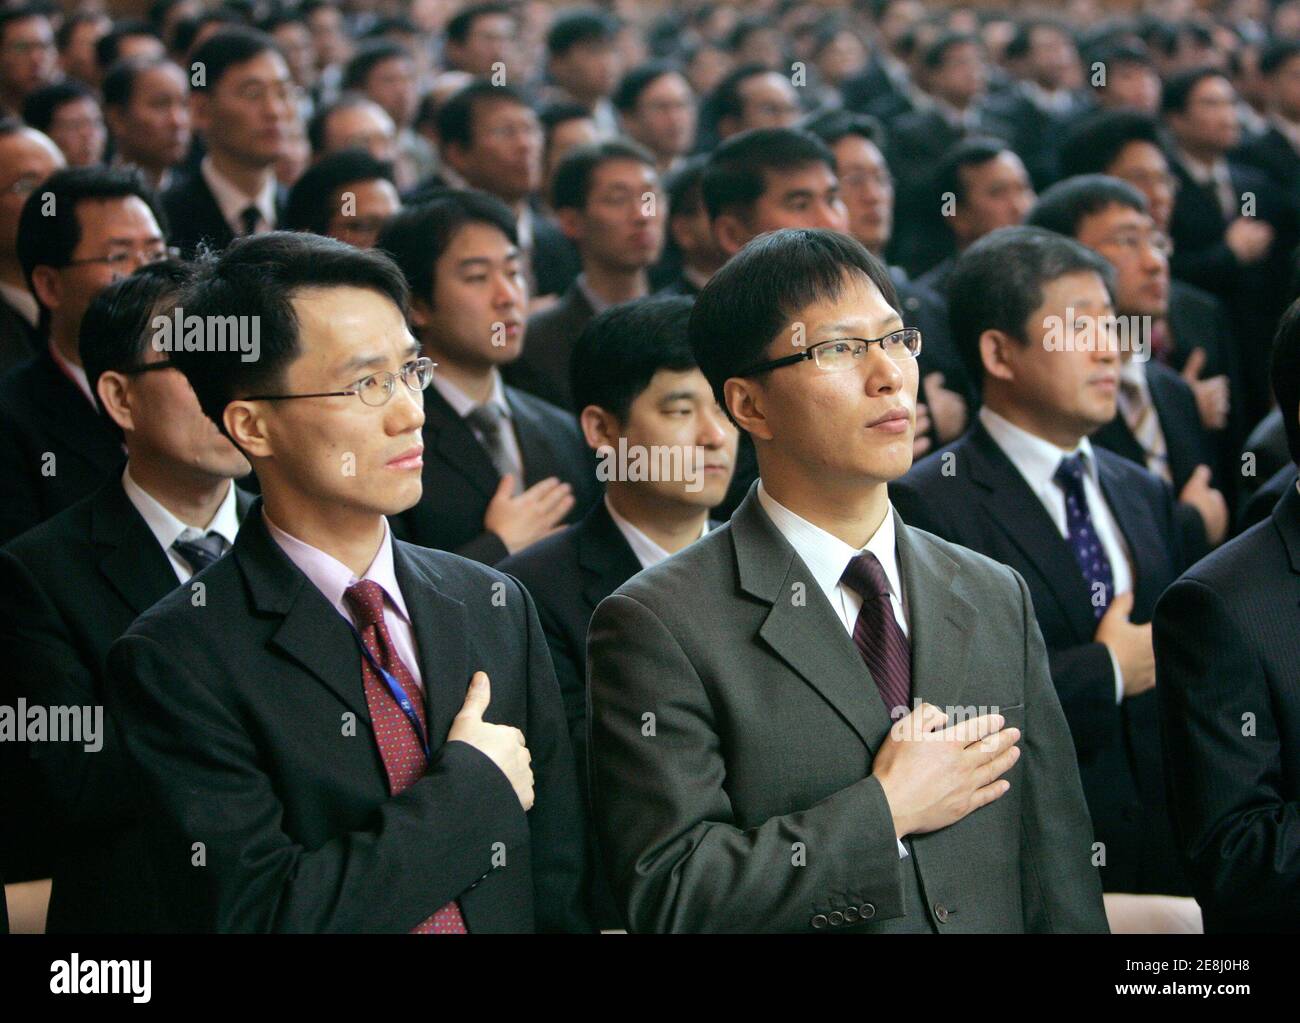 Employees of Hyundai Motor take part in a ceremony to mark the new year at the company headquarters in Seoul January 2, 2009. South Korean automakers' combined sales in December fell from a year ago, data showed on Friday, adding more concerns over the slowing world's car demand on a global recession and the financial crisis.  REUTERS/Jo Yong-Hak (SOUTH KOREA) Stock Photo